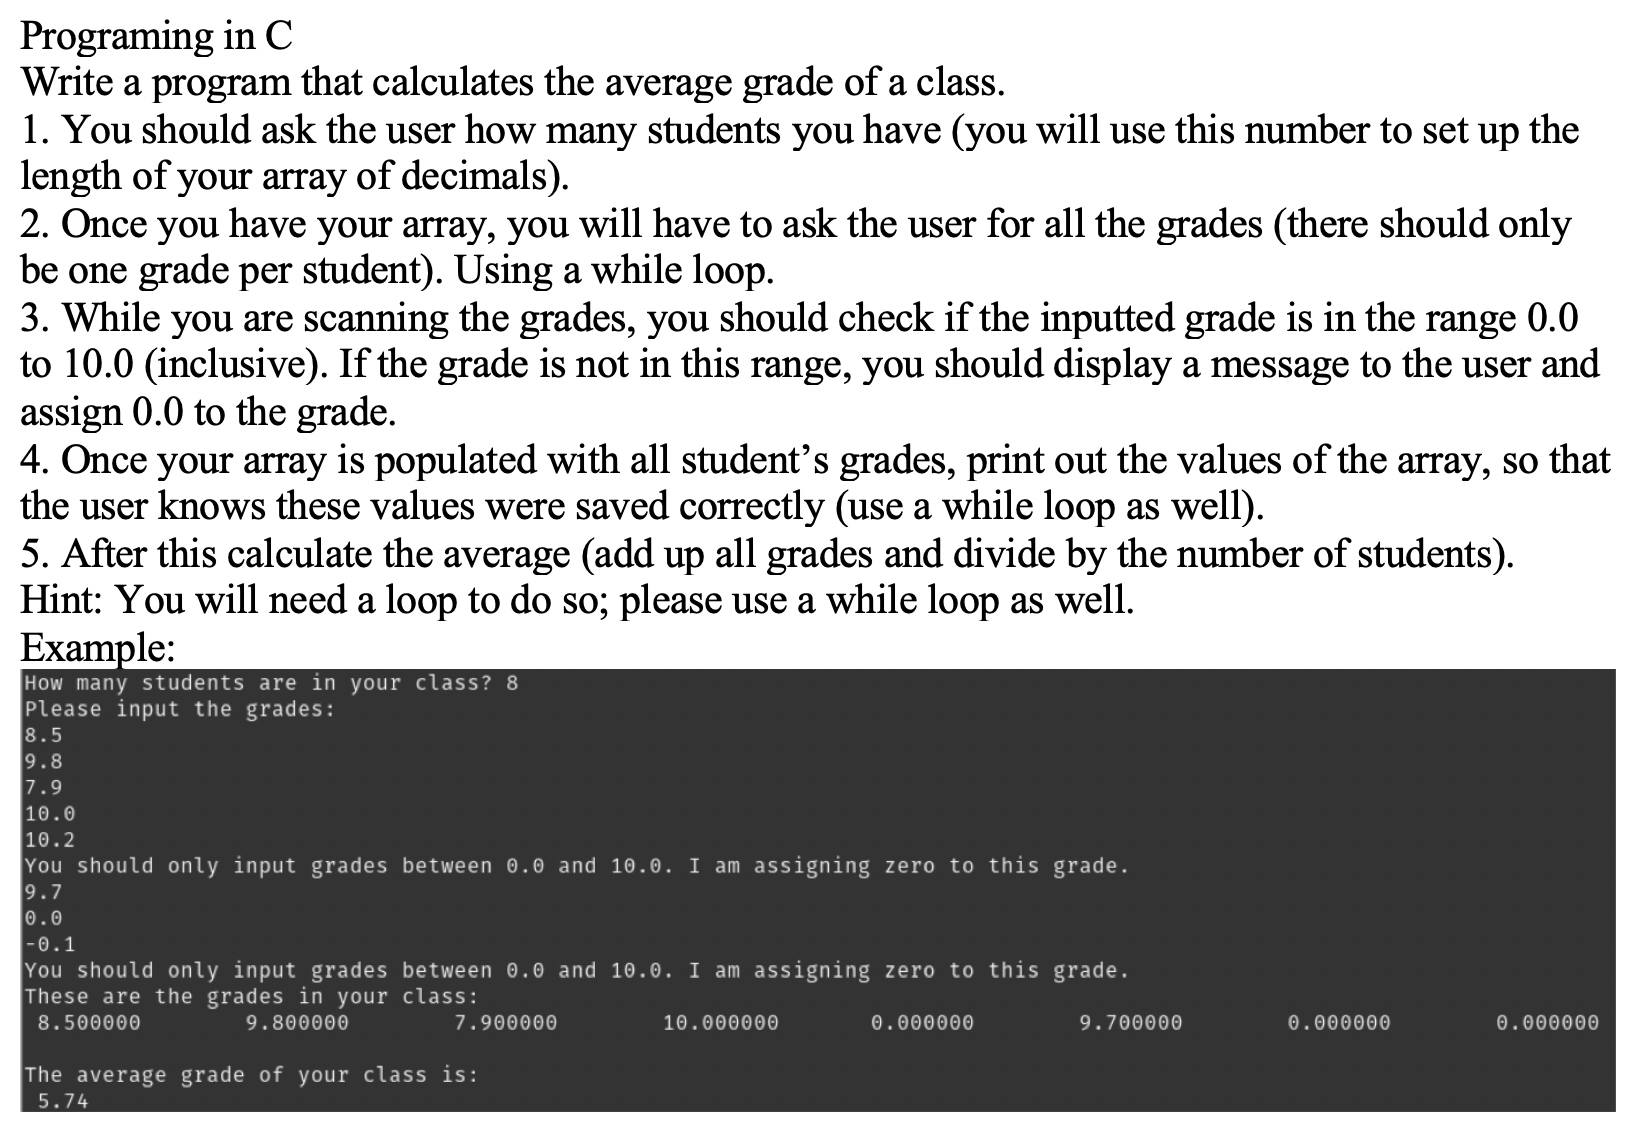 Programing in C
Write a program that calculates the average grade of a class.
1. You should ask the user how many students you have (you will use this number to set up the
length of your array of decimals).
2. Once you have your array, you will have to ask the user for all the grades (there should only
be one grade per student). Using a while loop.
3. While you are scanning the grades, you should check if the inputted grade is in the range 0.0
to 10.0 (inclusive). If the grade is not in this range, you should display a message to the user and
assign 0.0 to the grade.
4. Once your array is populated with all student's grades, print out the values of the array, so that
the user knows these values were saved correctly (use a while loop as well).
5. After this calculate the average (add up all grades and divide by the number of students).
Hint: You will need a loop to do so; please use a while loop as well.
Example:
How many students are in your class? 8
Please input the grades:
8.5
9.8
7.9
10.0
10.2
You should only input grades between 0.0 and 10.0. I am assigning zero to this grade.
9.7
0.0
-0.1
You should only input grades between 0.0 and 10.0. I am assigning zero to this grade.
These are the grades in your class:
8.500000
9.800000
7.900000
10.000000
0.000000
9.700000
0.000000
0.000000
The average grade of your class is:
5.74
